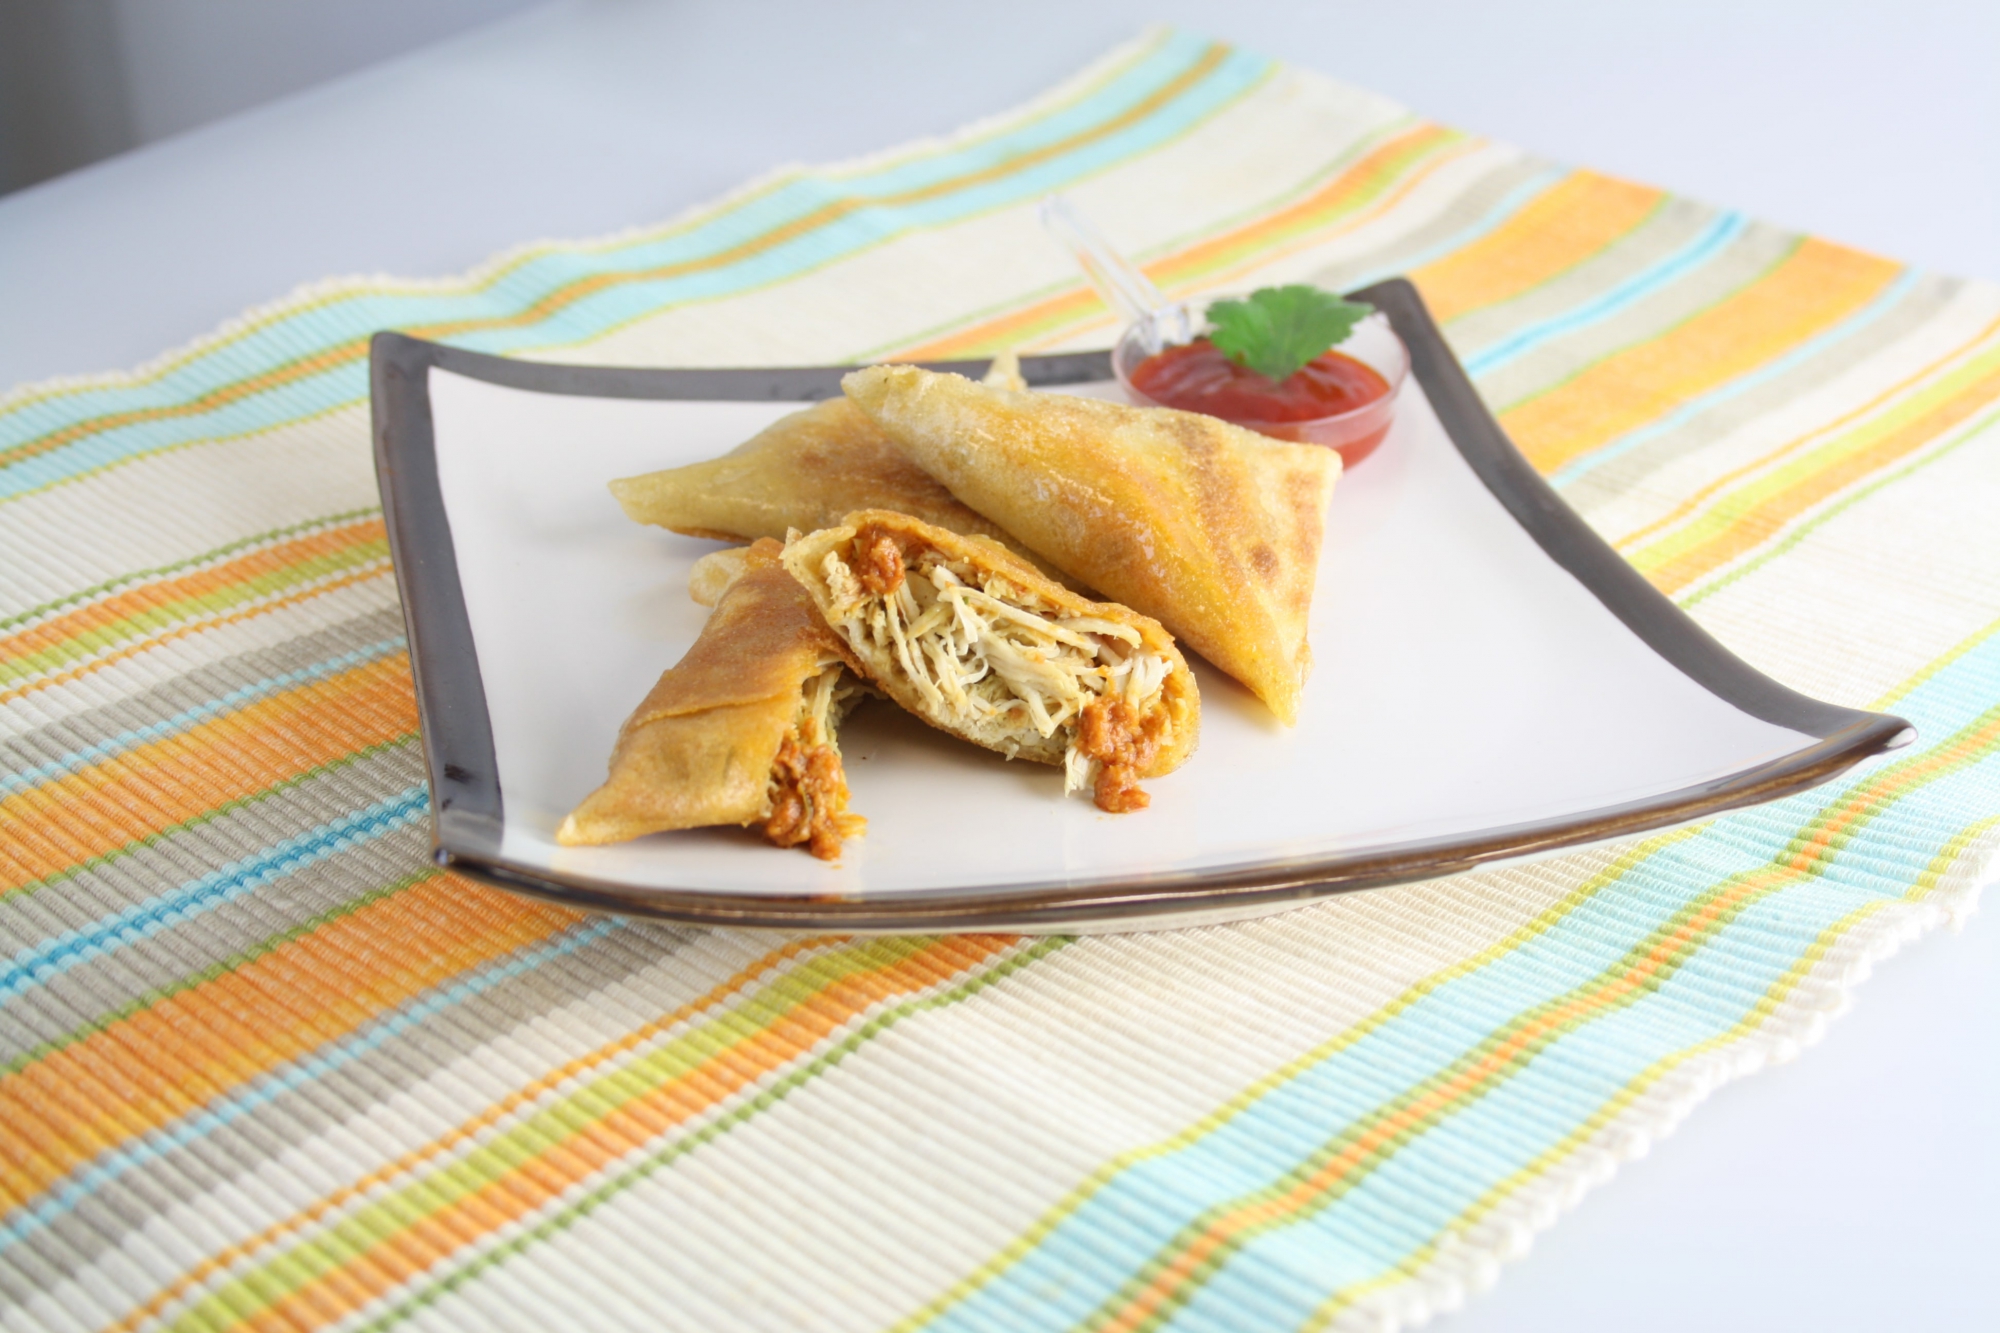 Samosa with confit duck - 